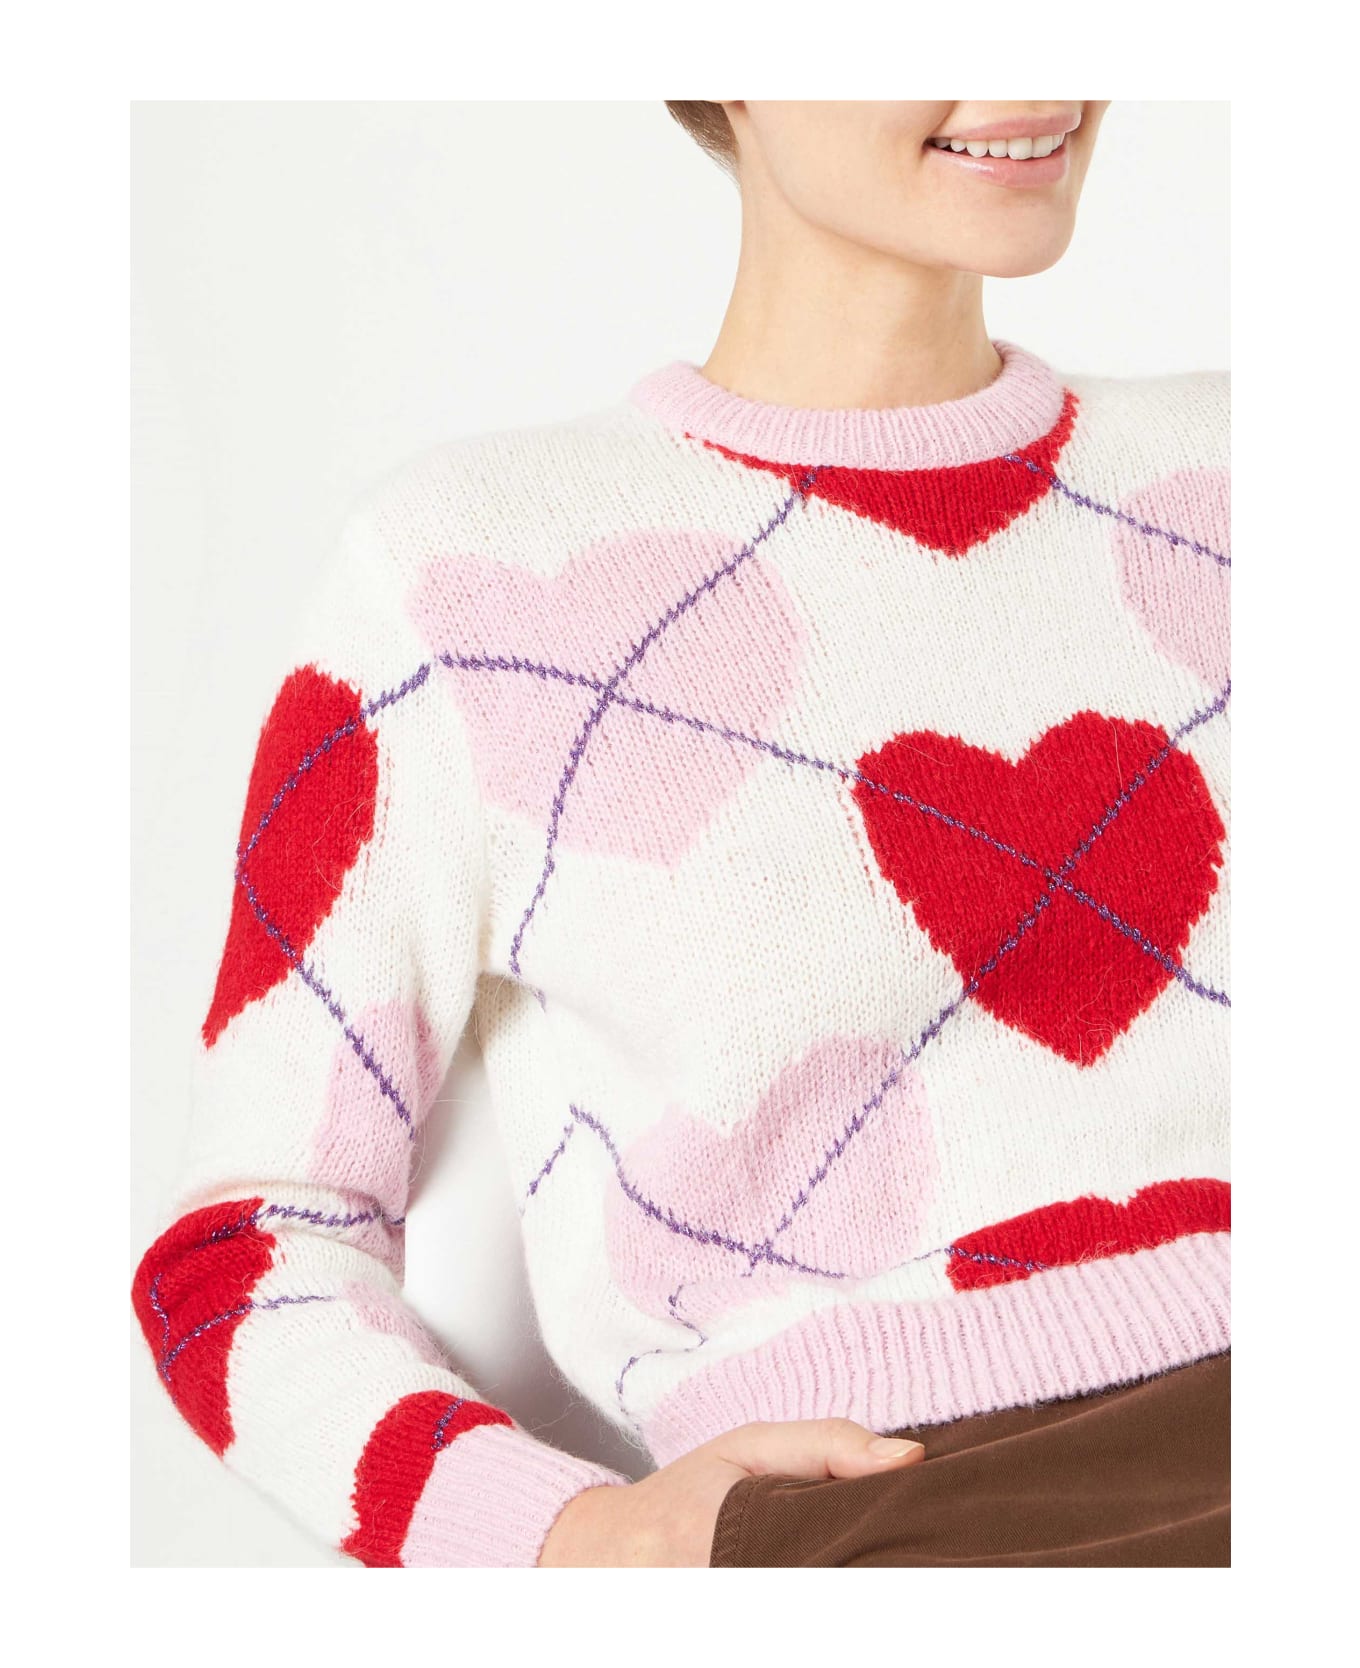 MC2 Saint Barth Woman Brushed Cropped Sweater With Heart Pattern - MULTICOLOR